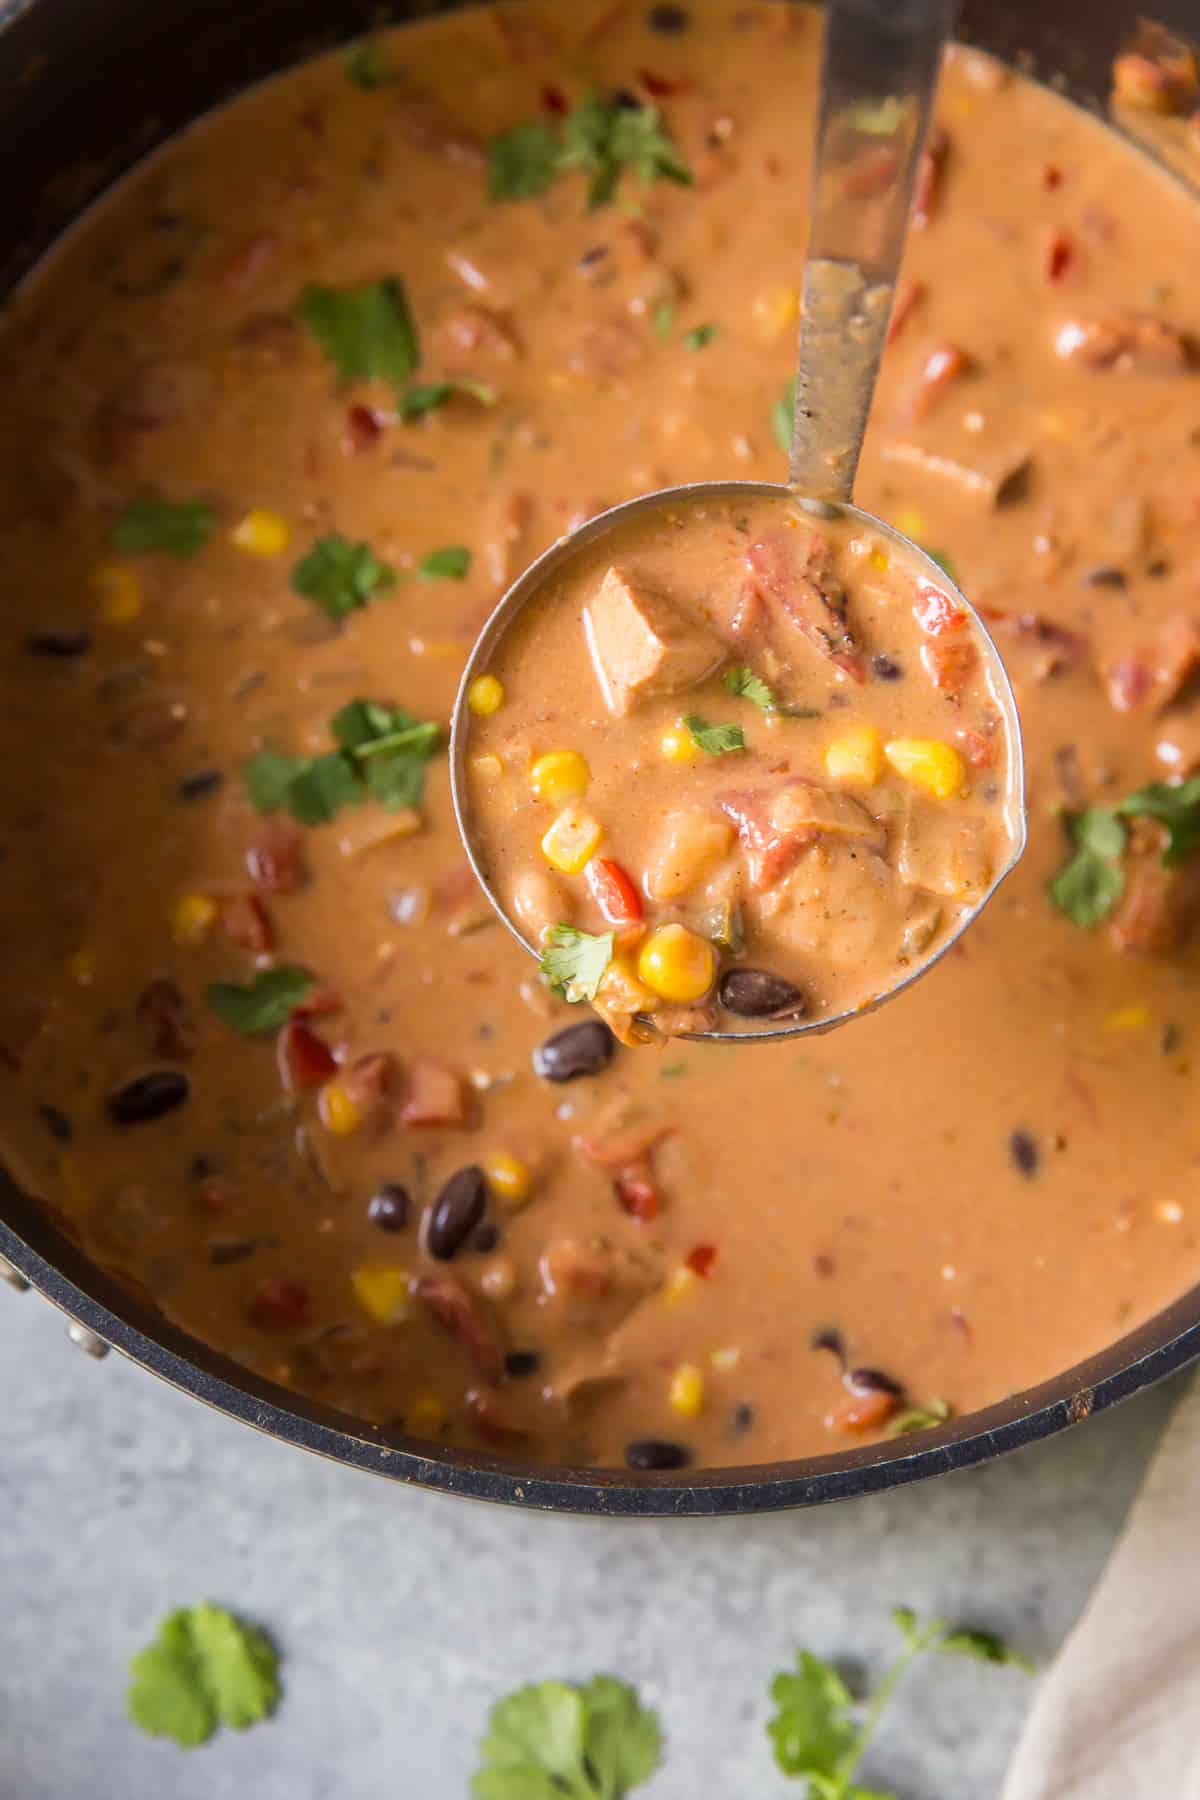 A ladle scoops soup with chicken, corn, and beans from a pot.